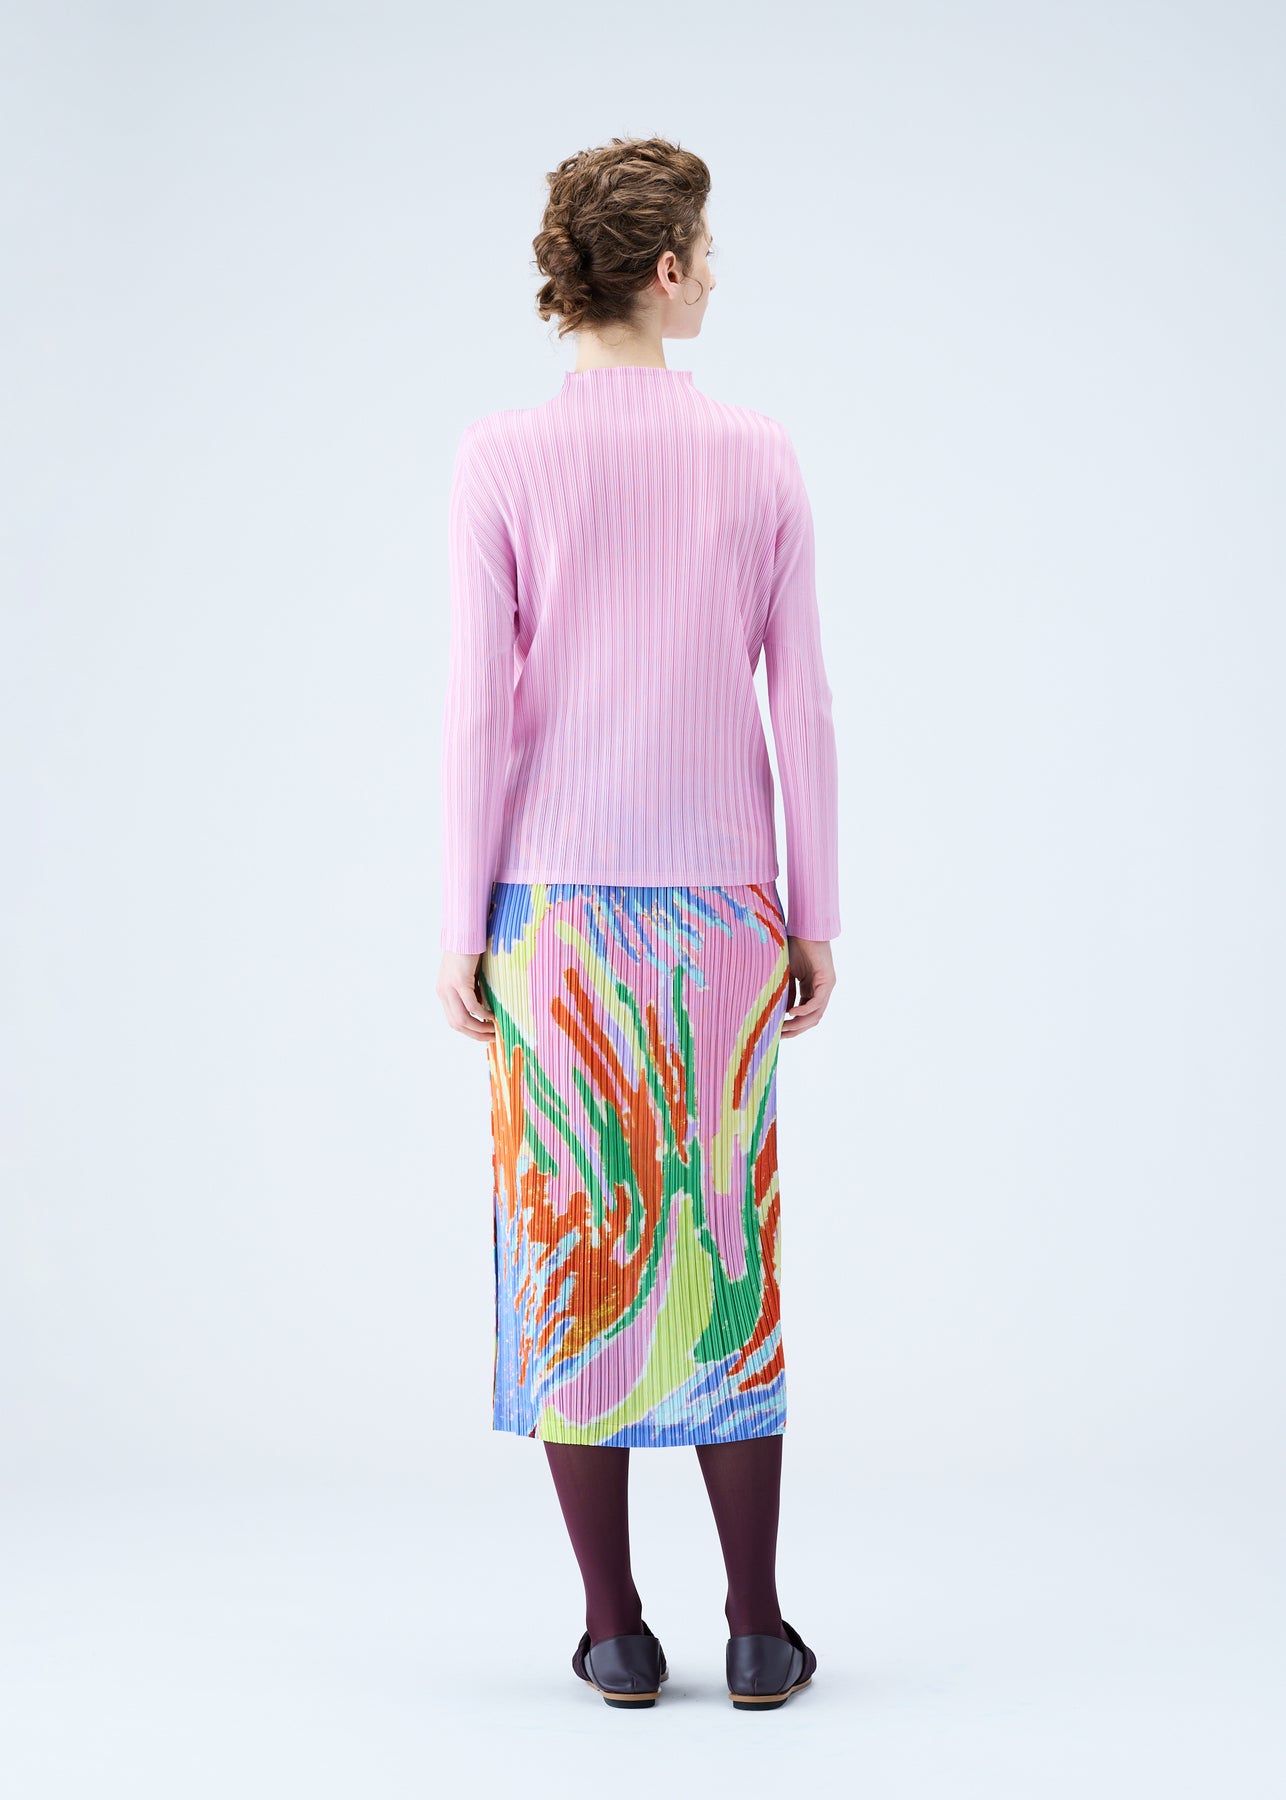 FROSTY FOREST SKIRT | The official ISSEY MIYAKE ONLINE STORE